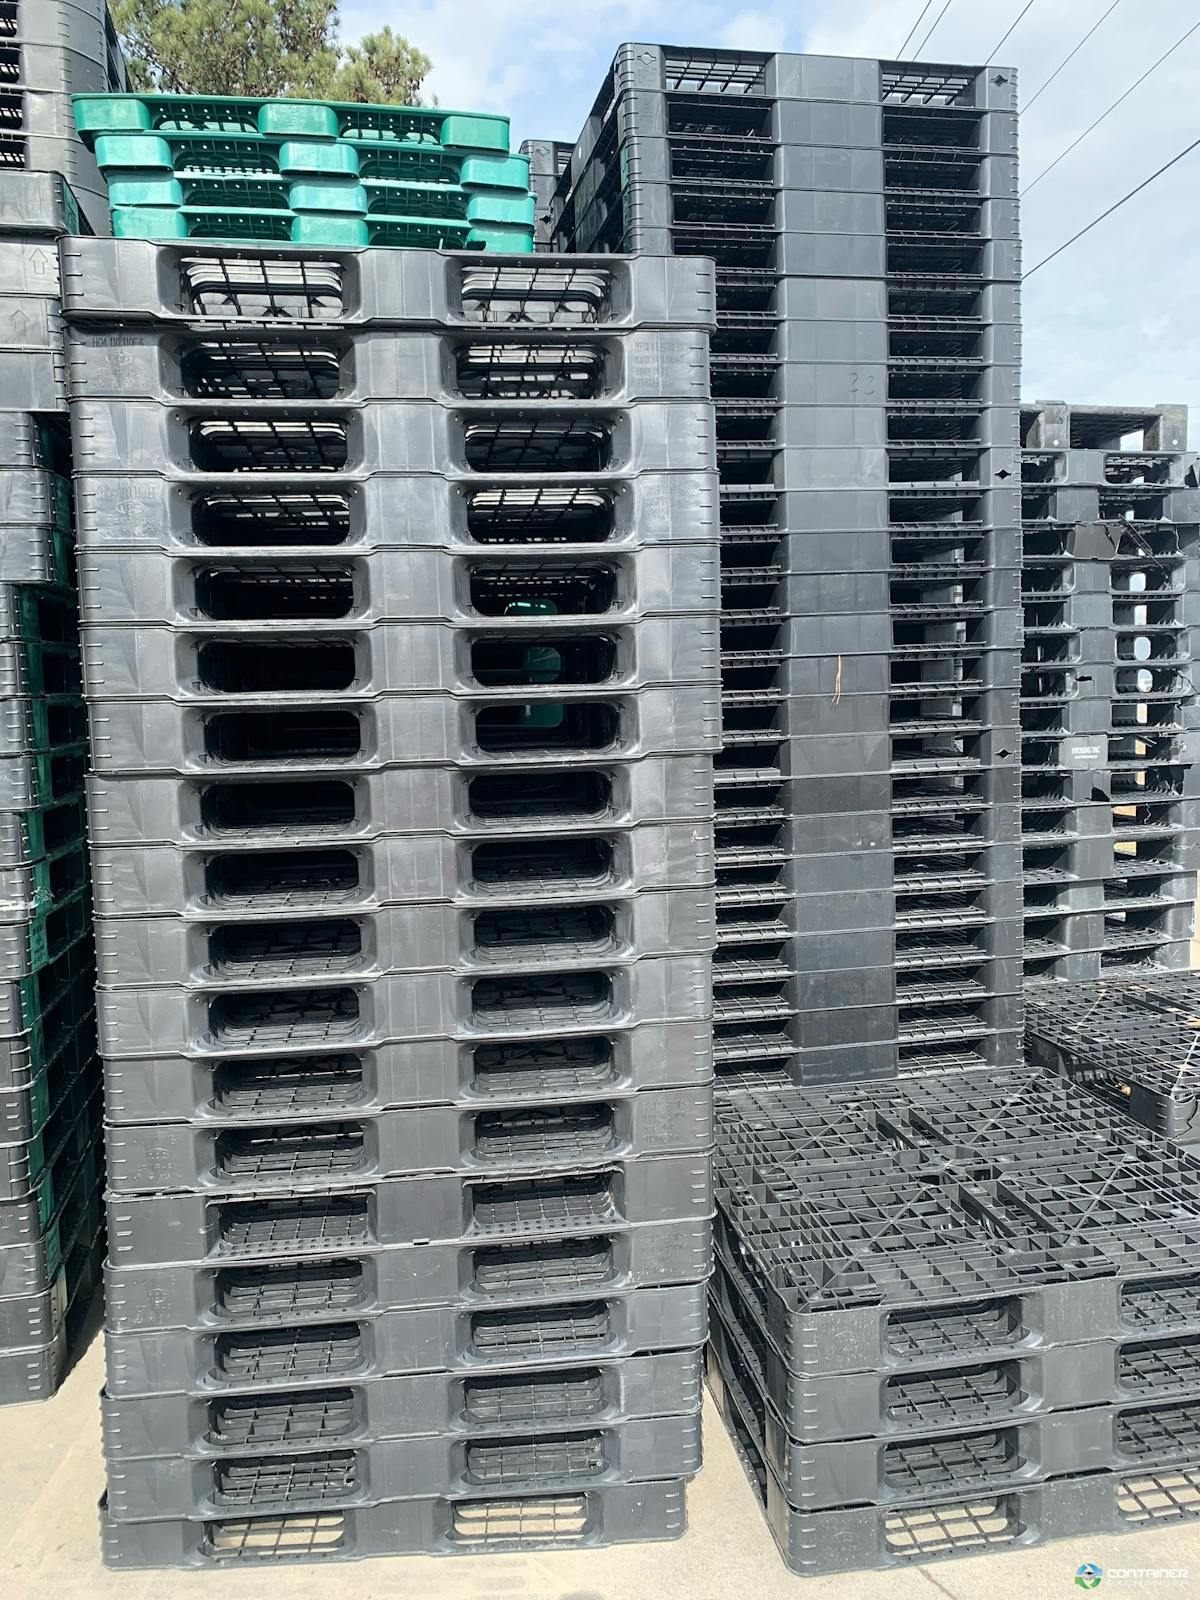 Plastic Pallets For Sale: Used 43x43x4-5 Plastic Pallets Georgia In Georgia - image  3